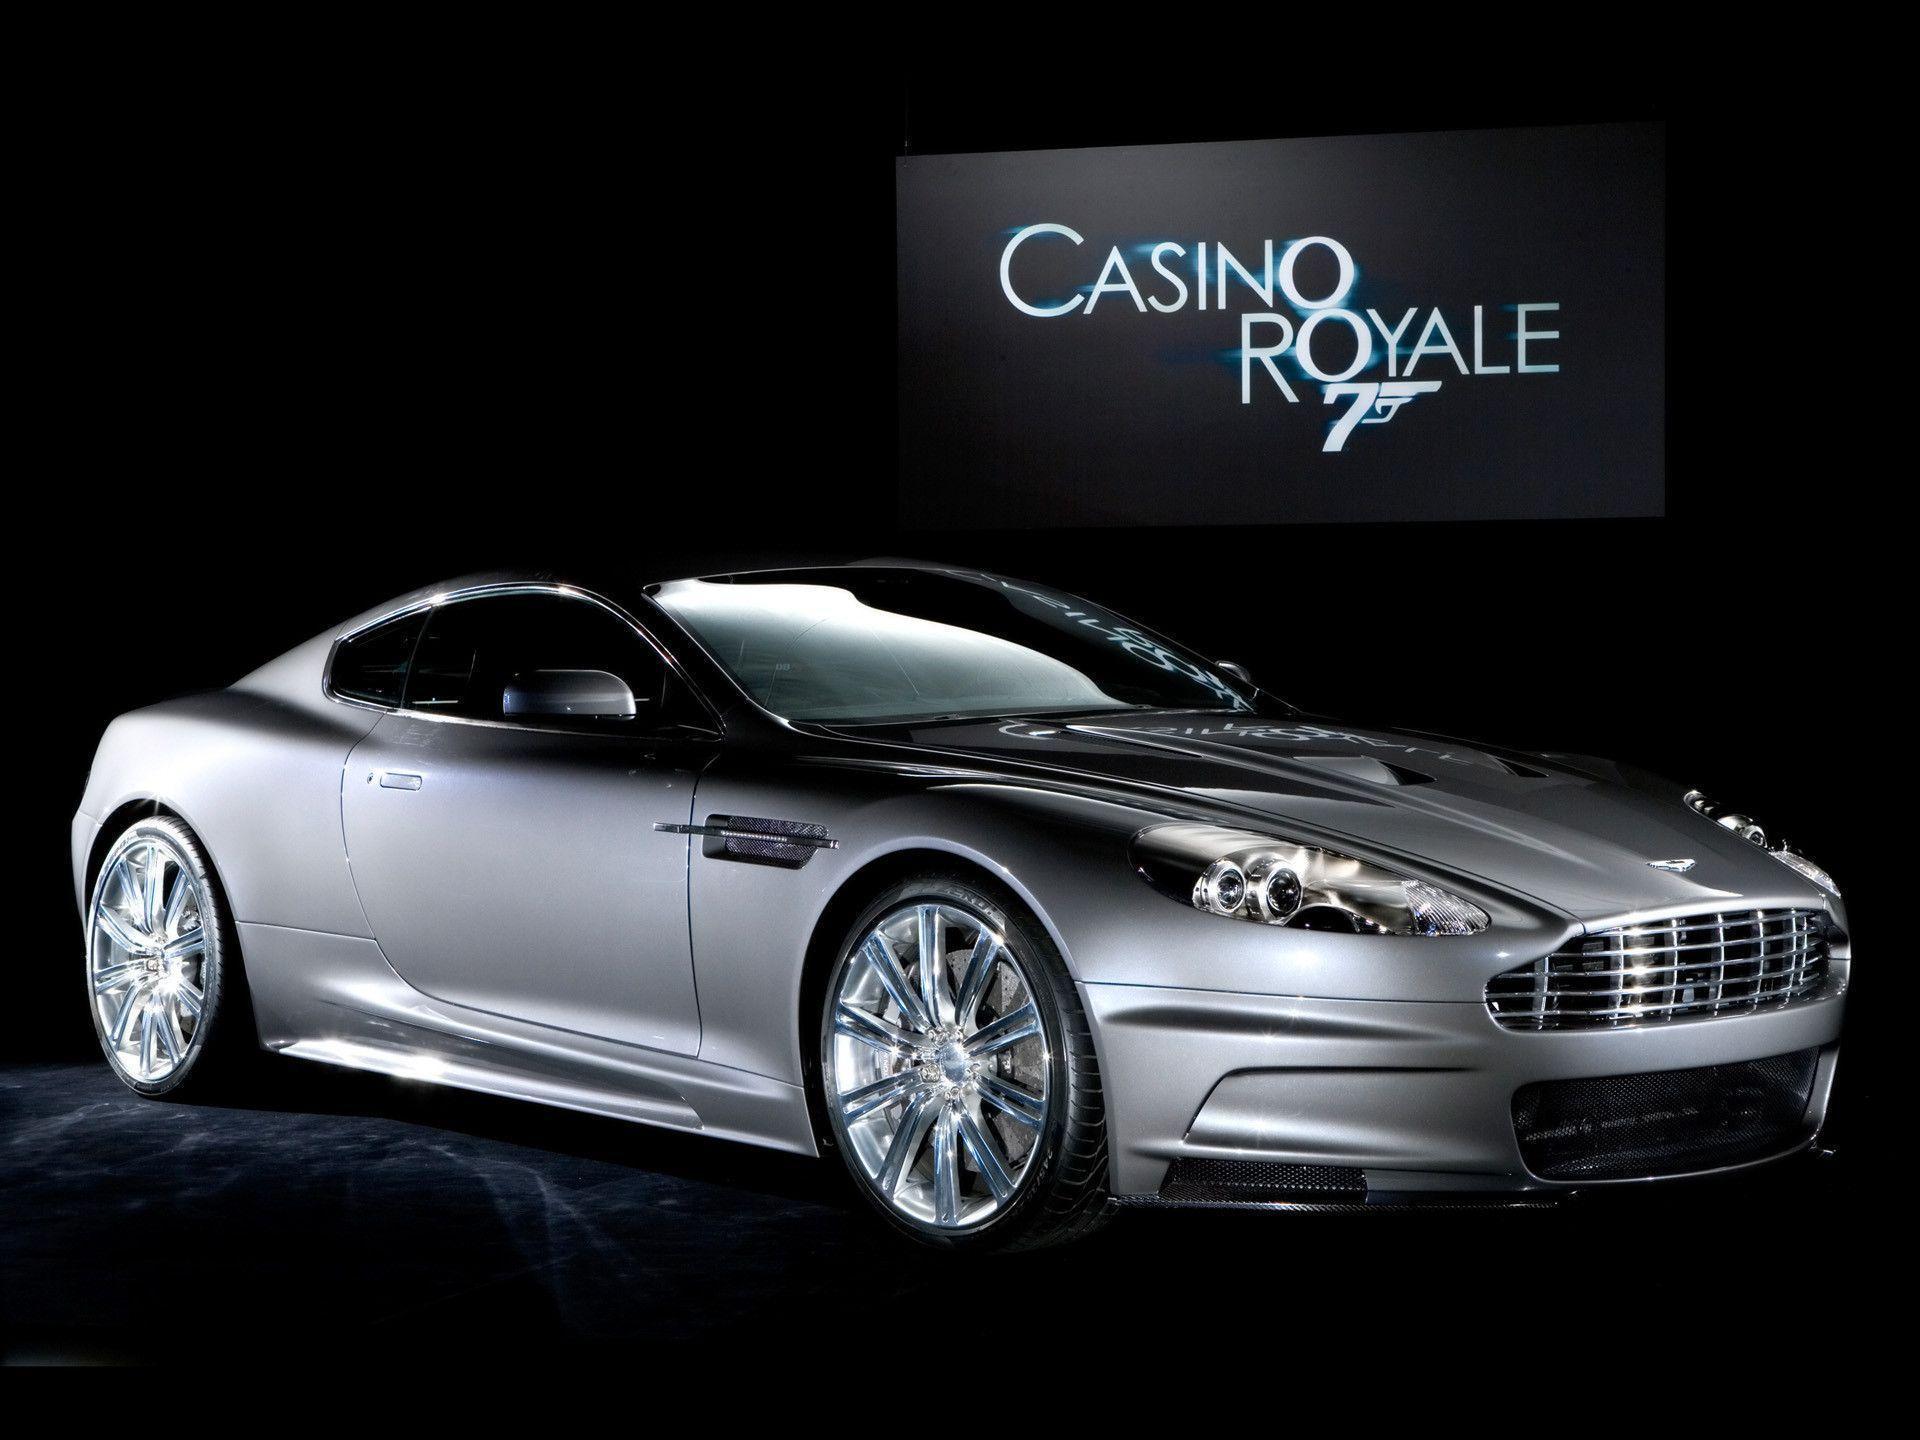 Wallpaper of the day: Casino Royale. Casino Royale wallpaper